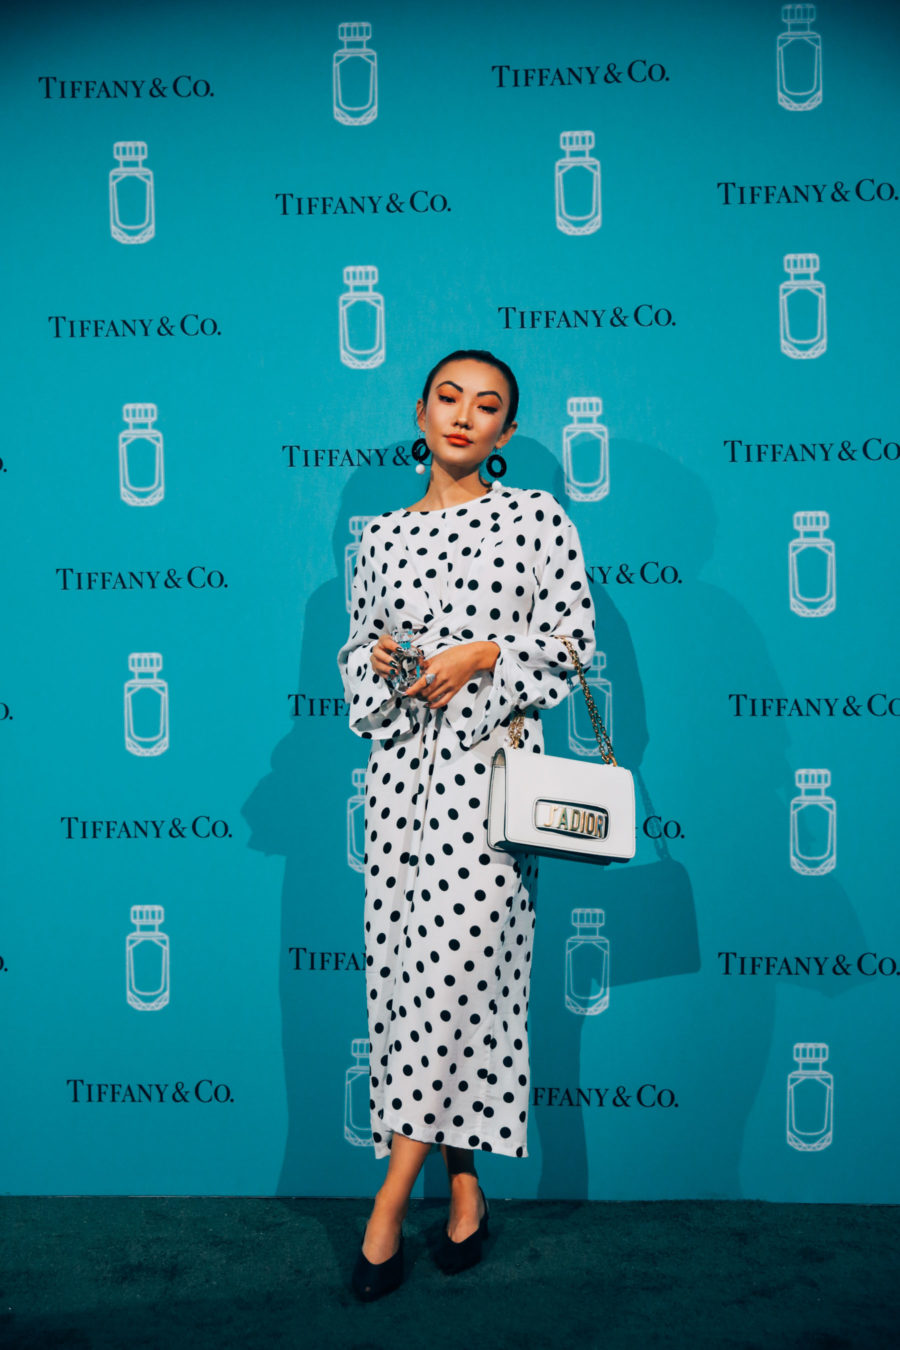 NYFW Hermes and Tiffany & Co. Fragrance Launch // NotJessFashion.com